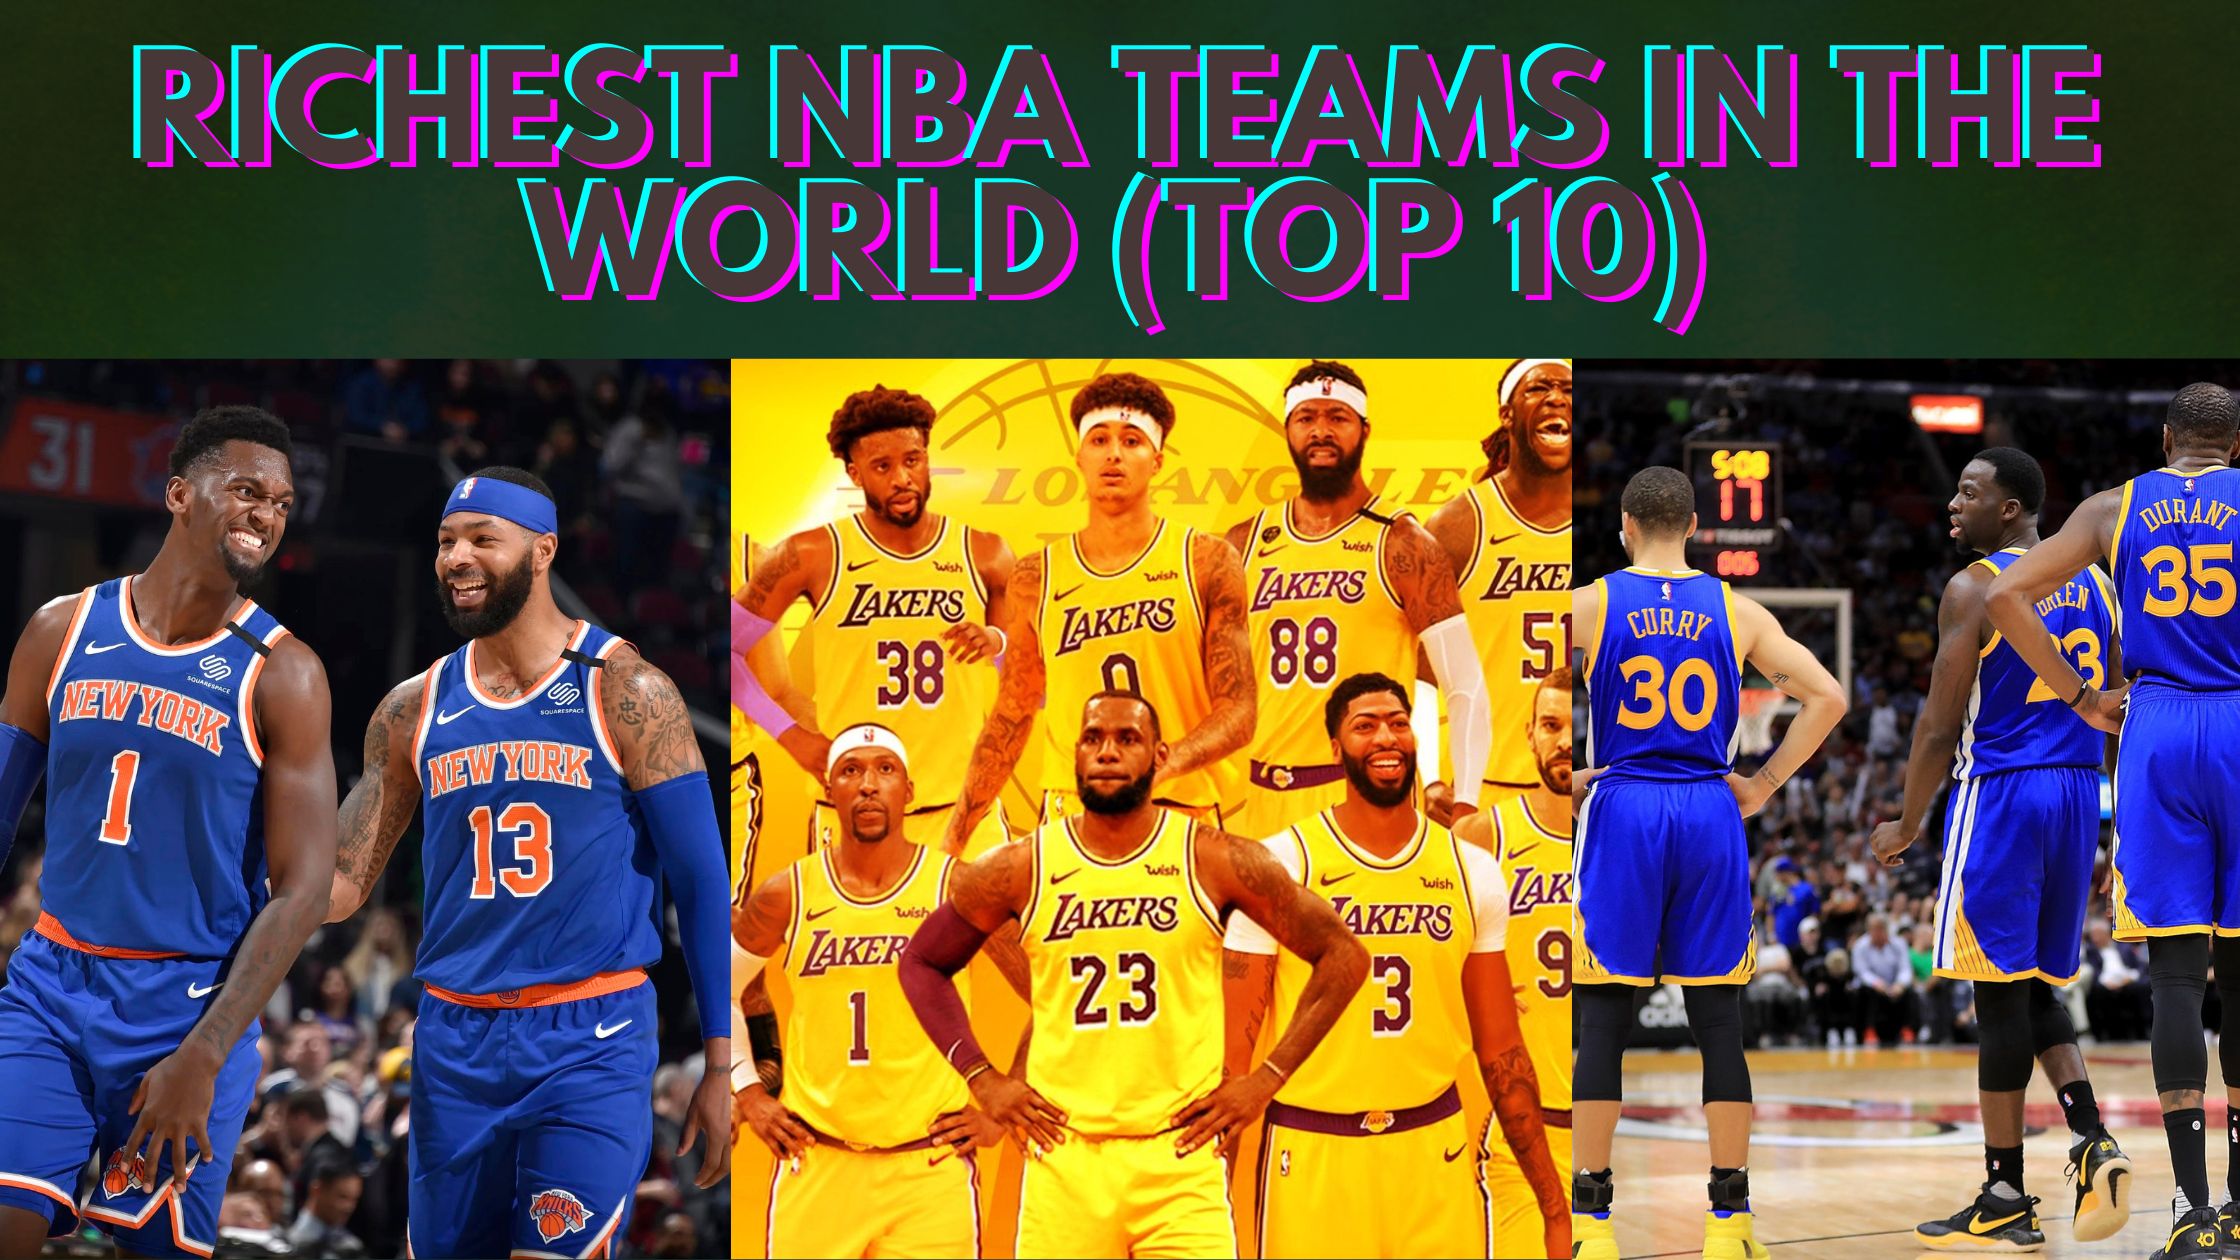 top 10 richest NBA team in the world